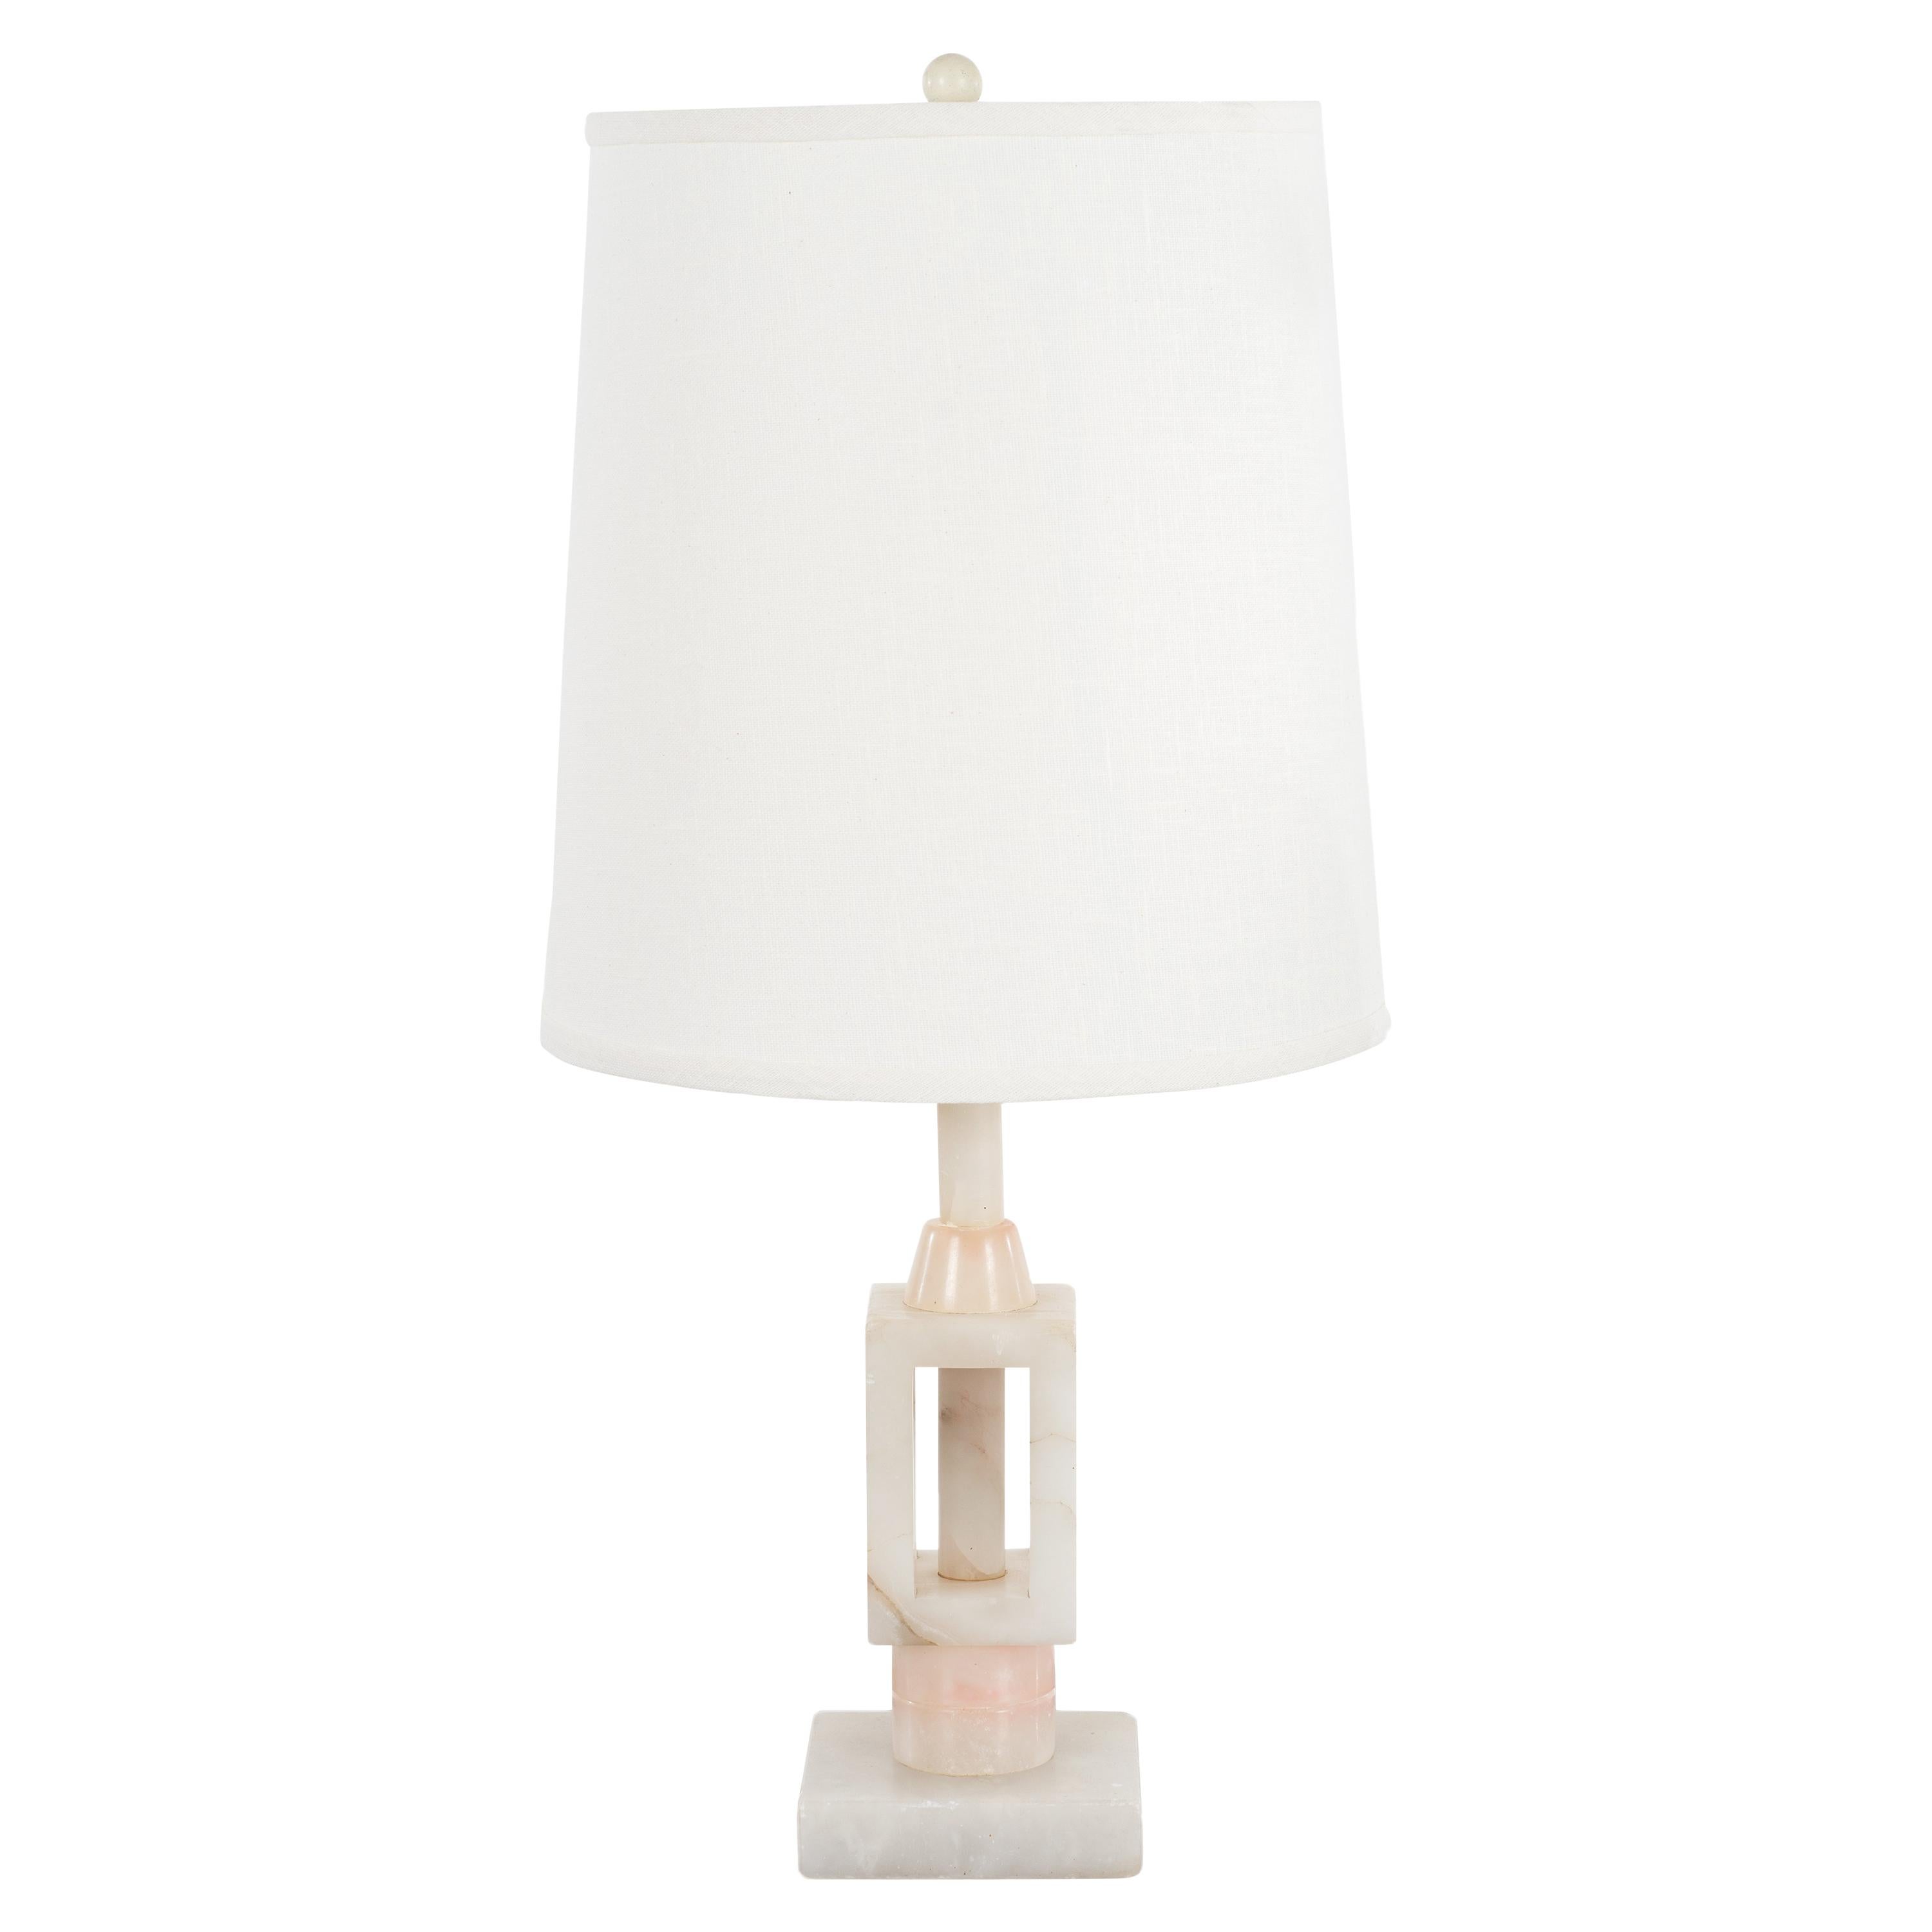 Arturo Pani Style Onyx Marble Table Lamp For Sale